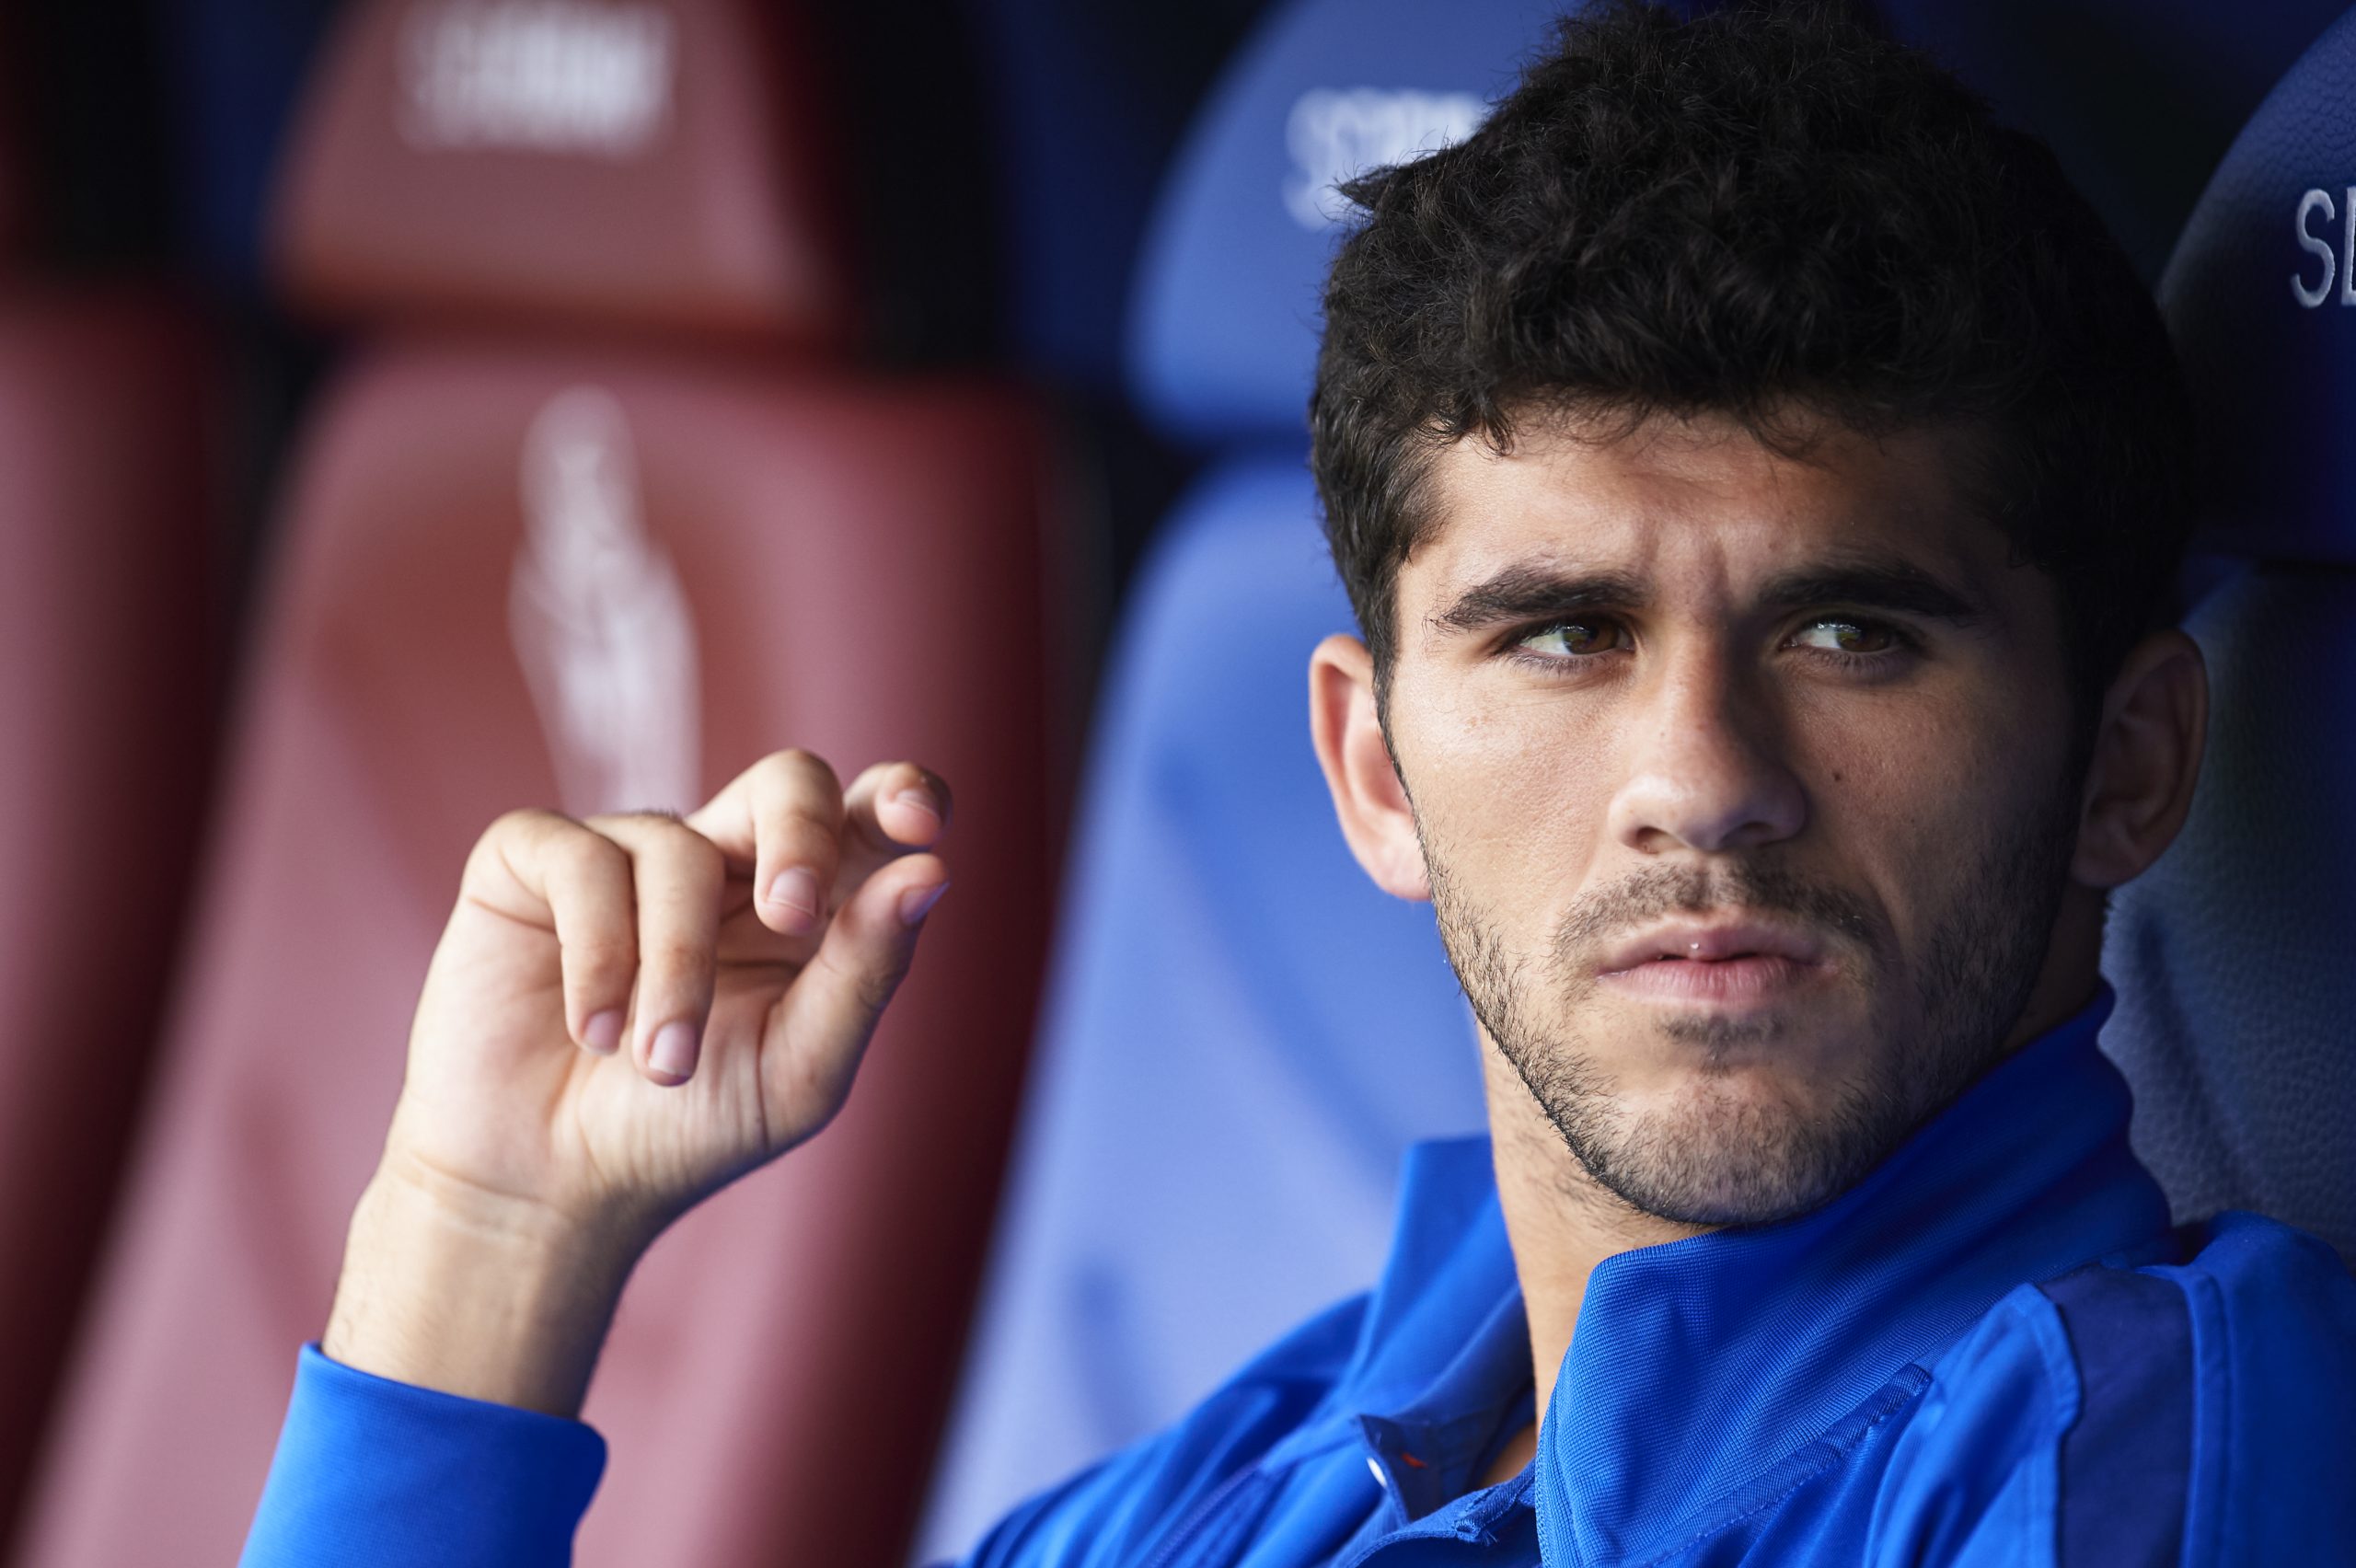 Getafe eyeing a January loan move for Barcelona's Alena who is seen in the photo